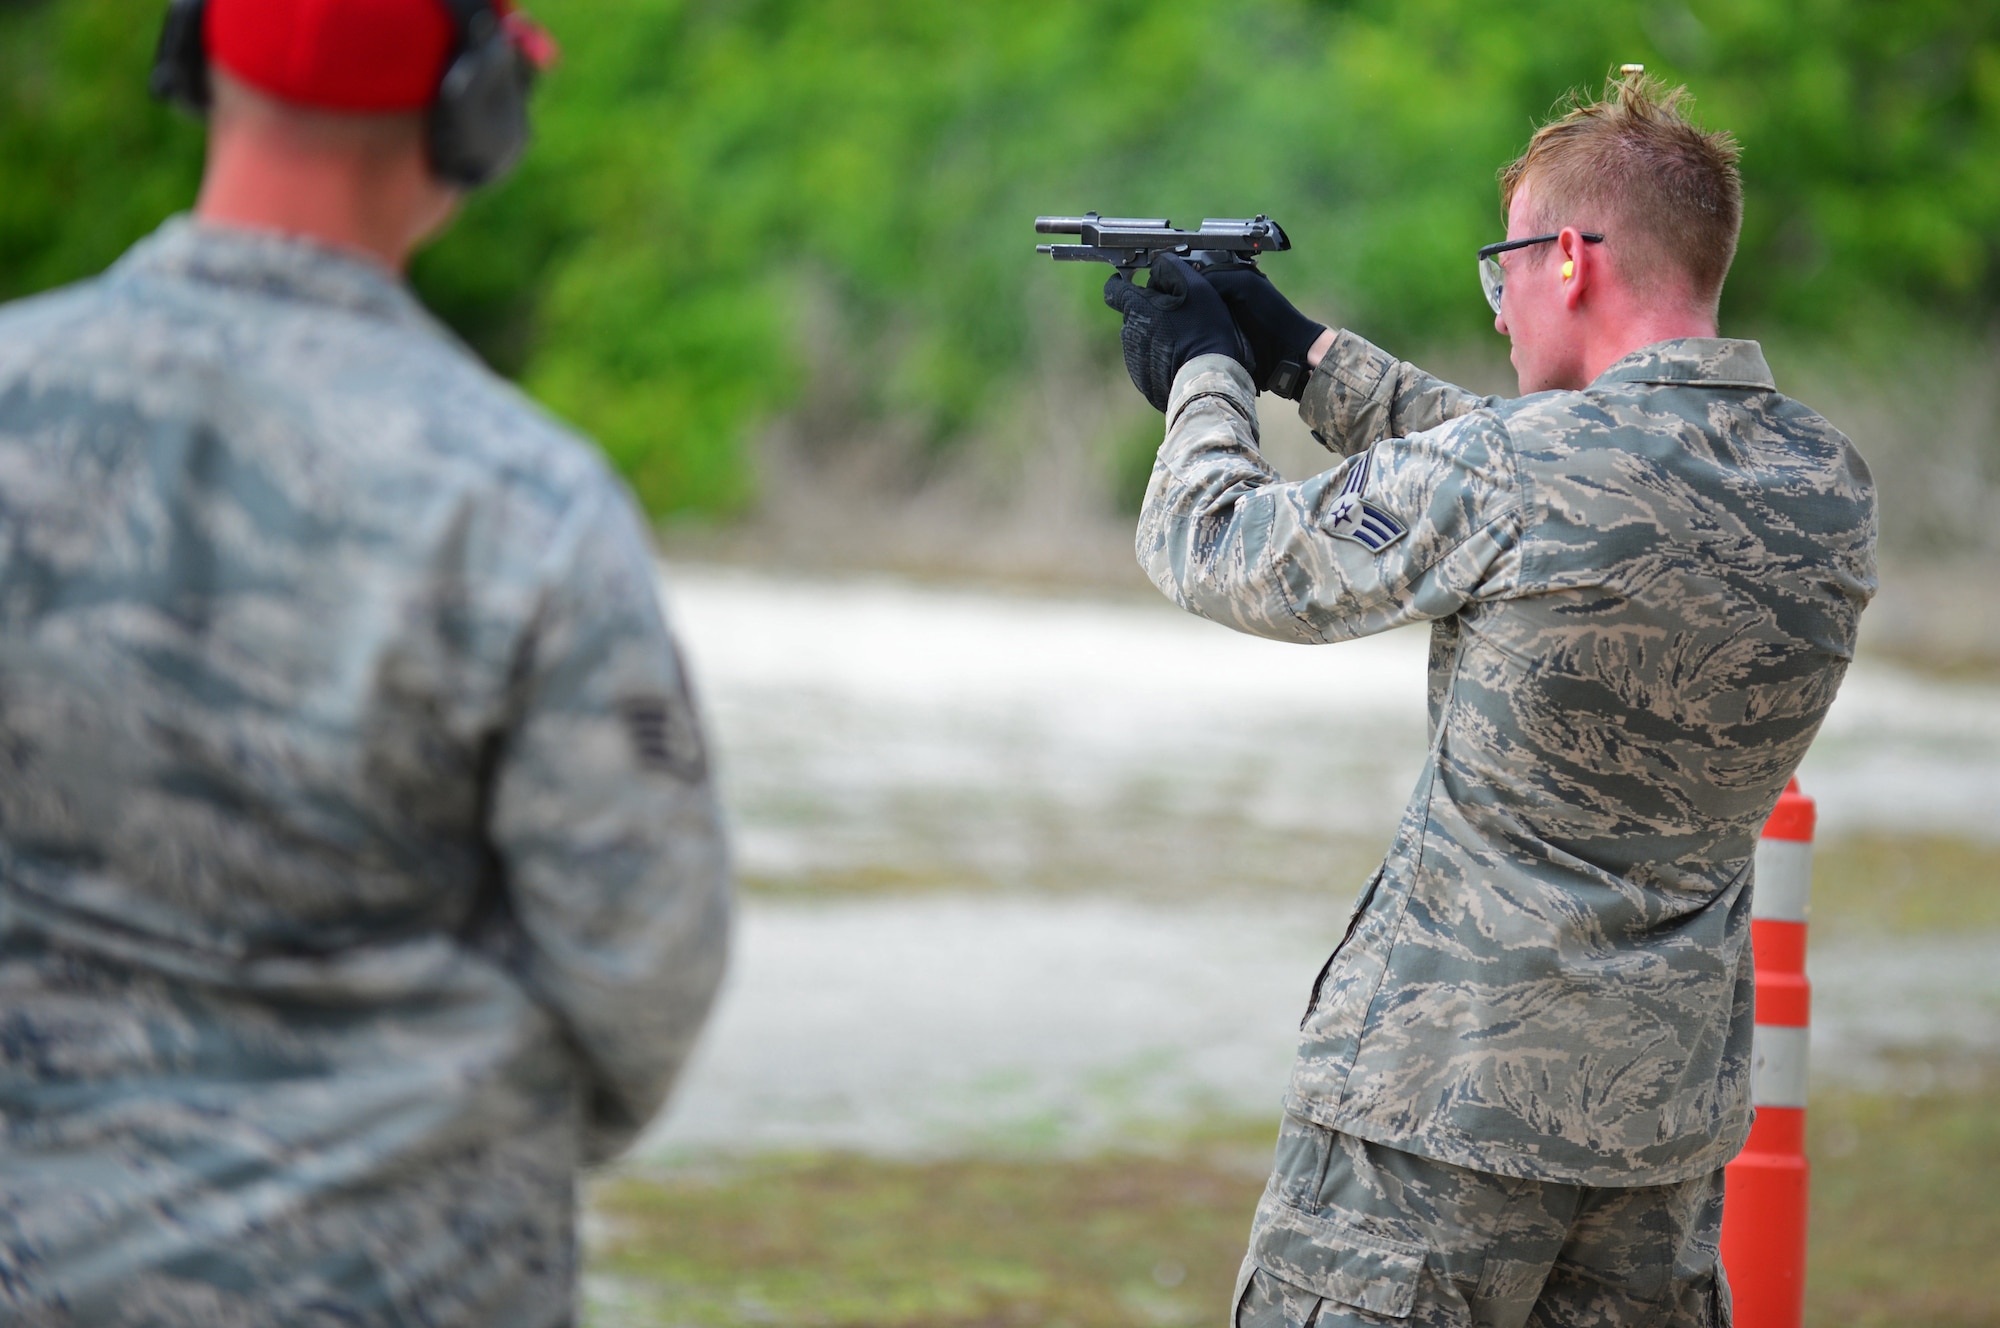 A Police Week Defender Challenge participant fires an M9 pistol May 18, 2016, at Andersen Air Force Base, Guam. To get people motivated for Police Week, the 36th SFS hosted the Defender Challenge, pitting Airmen against a variety of obstacles and navigational tasks. (U.S. Air Force photo by Senior Airman Joshua Smoot)